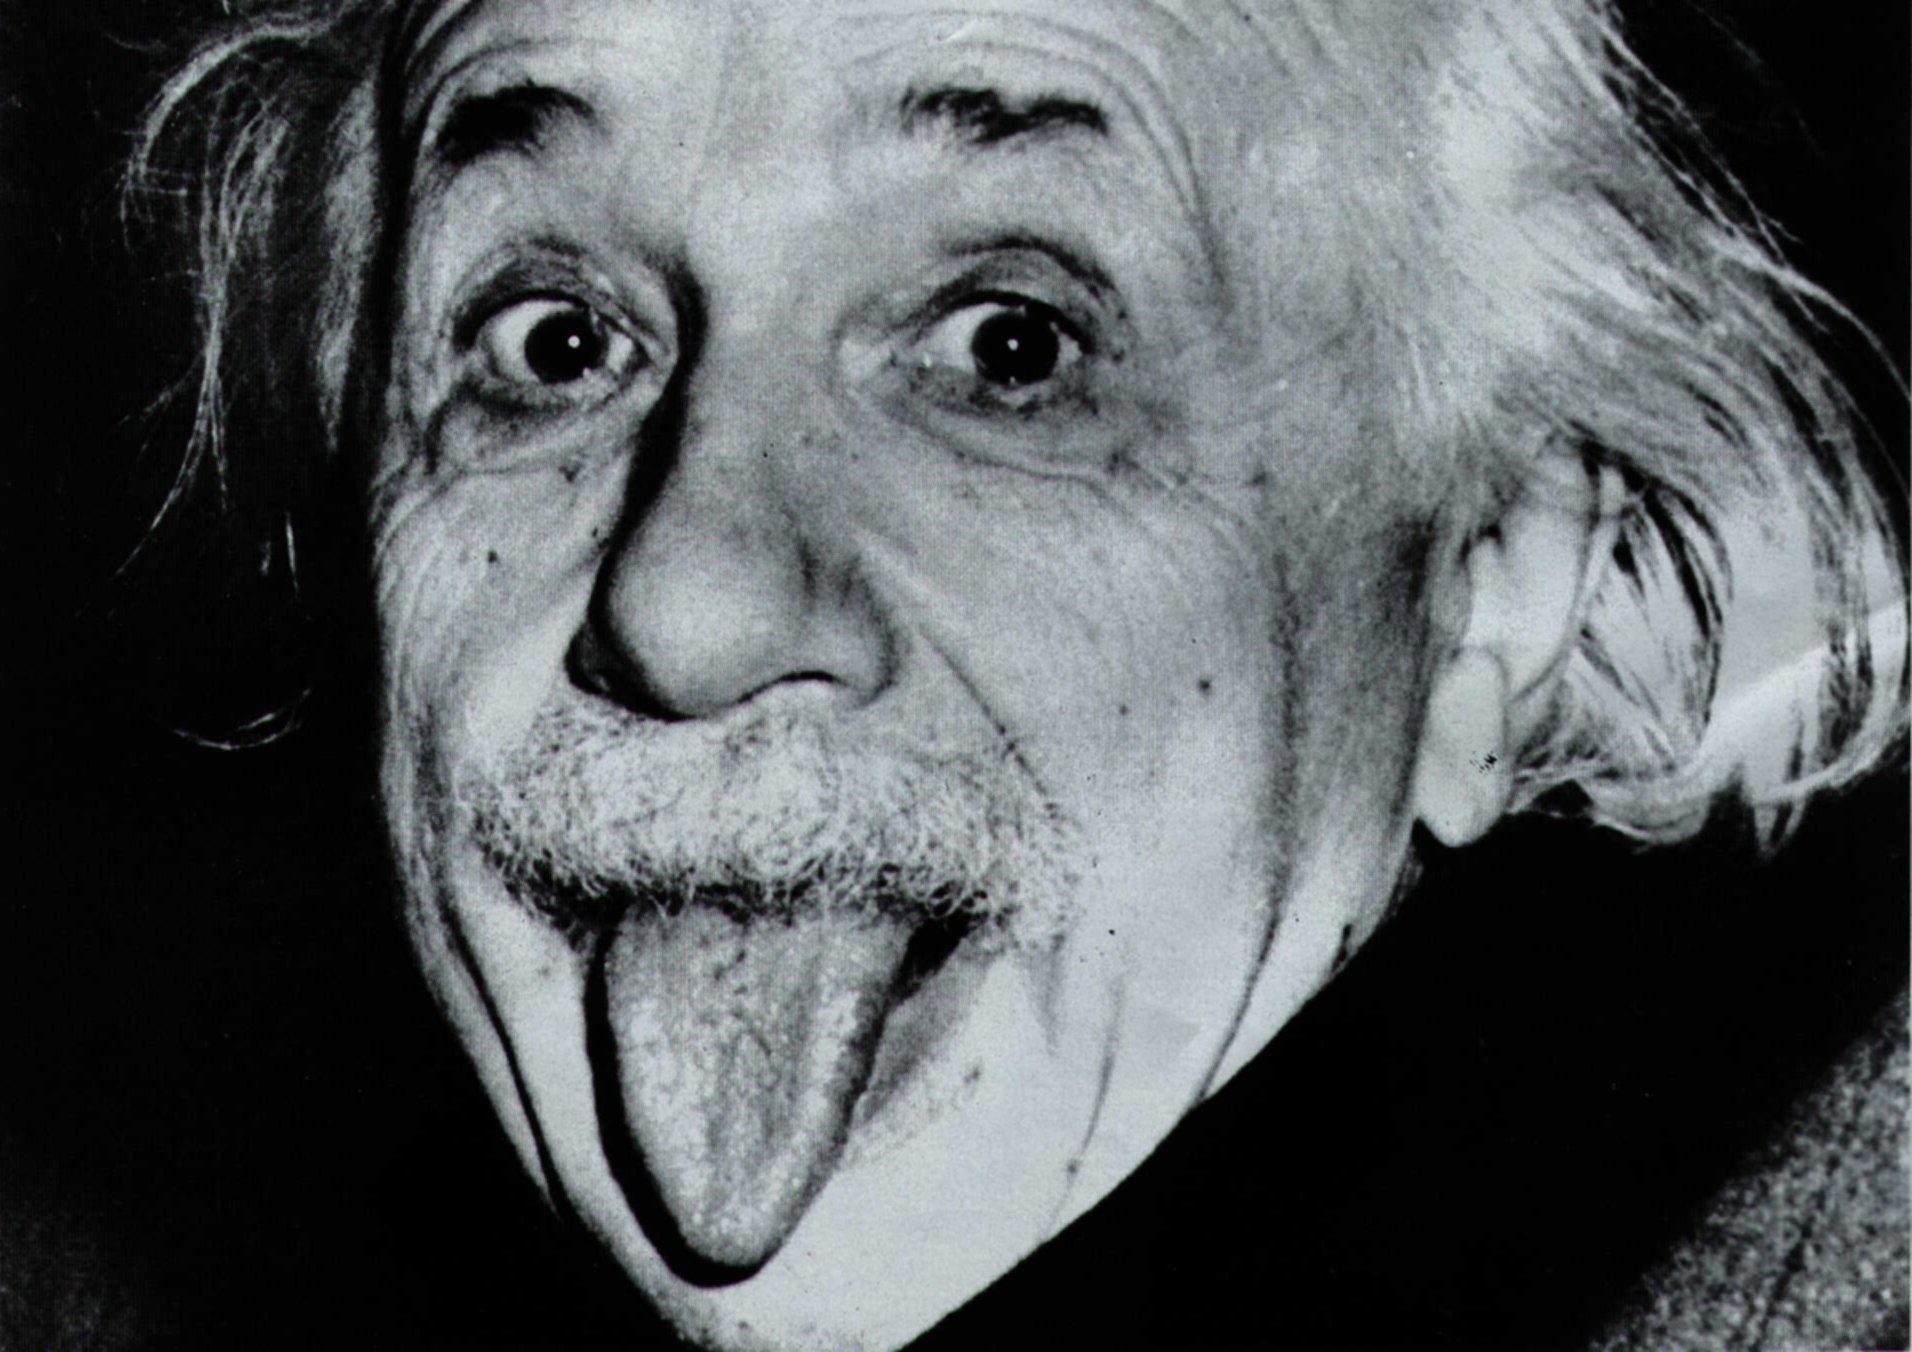 Central Bankers And Einstein’s Definition Of Insanity